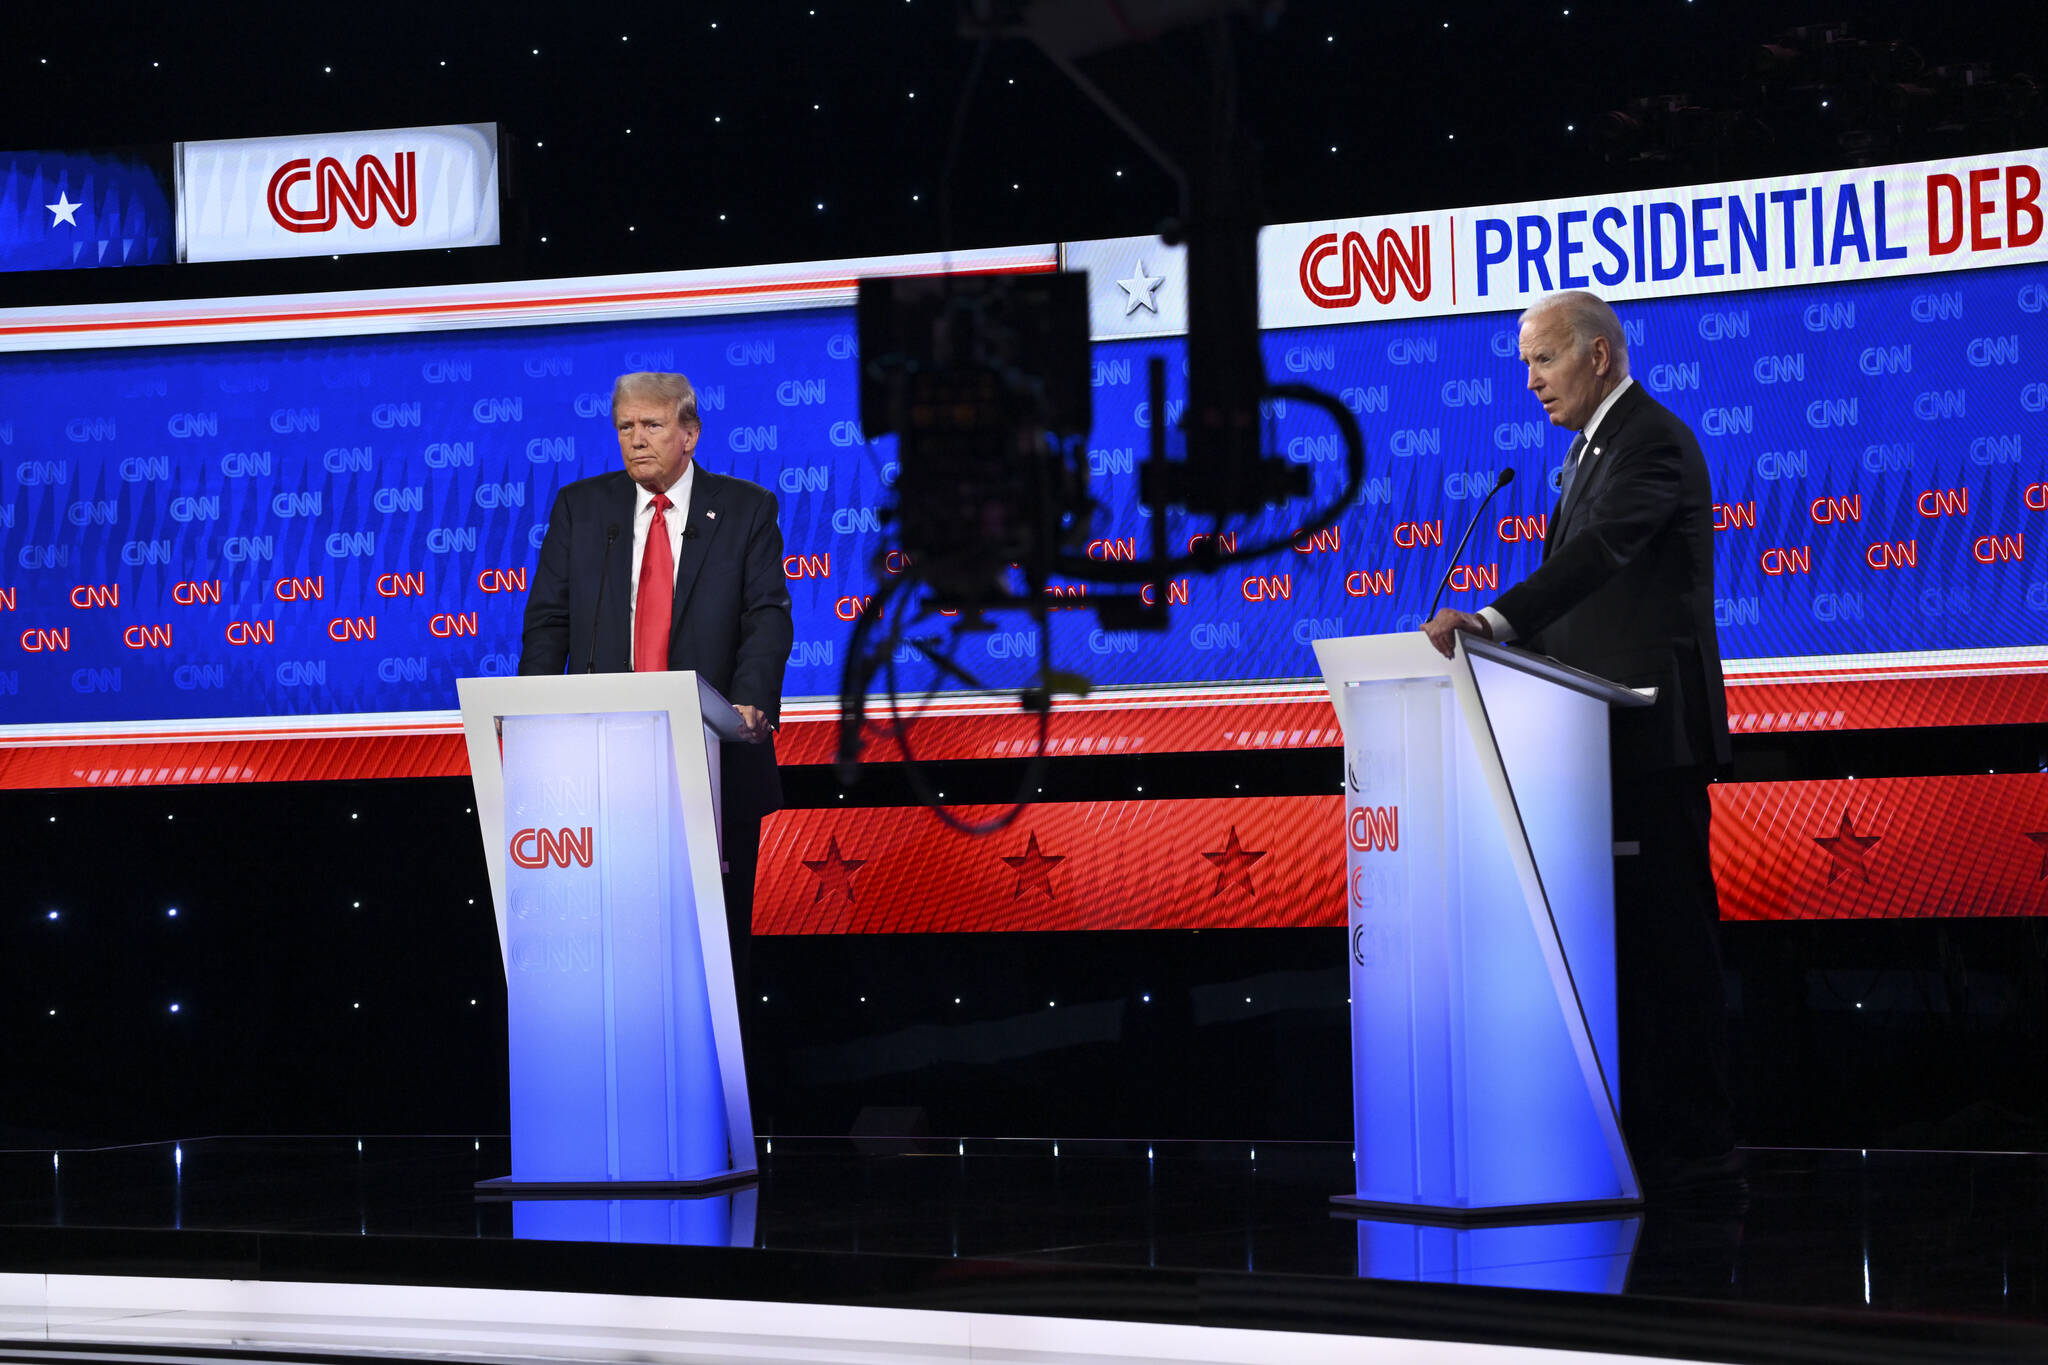 Former President Donald Trump and President Joe Biden listen to the moderators during the first 2024 presidential election debate at CNN’s headquarters in Atlanta on Thursday. (Kenny Holston/The New York Times)